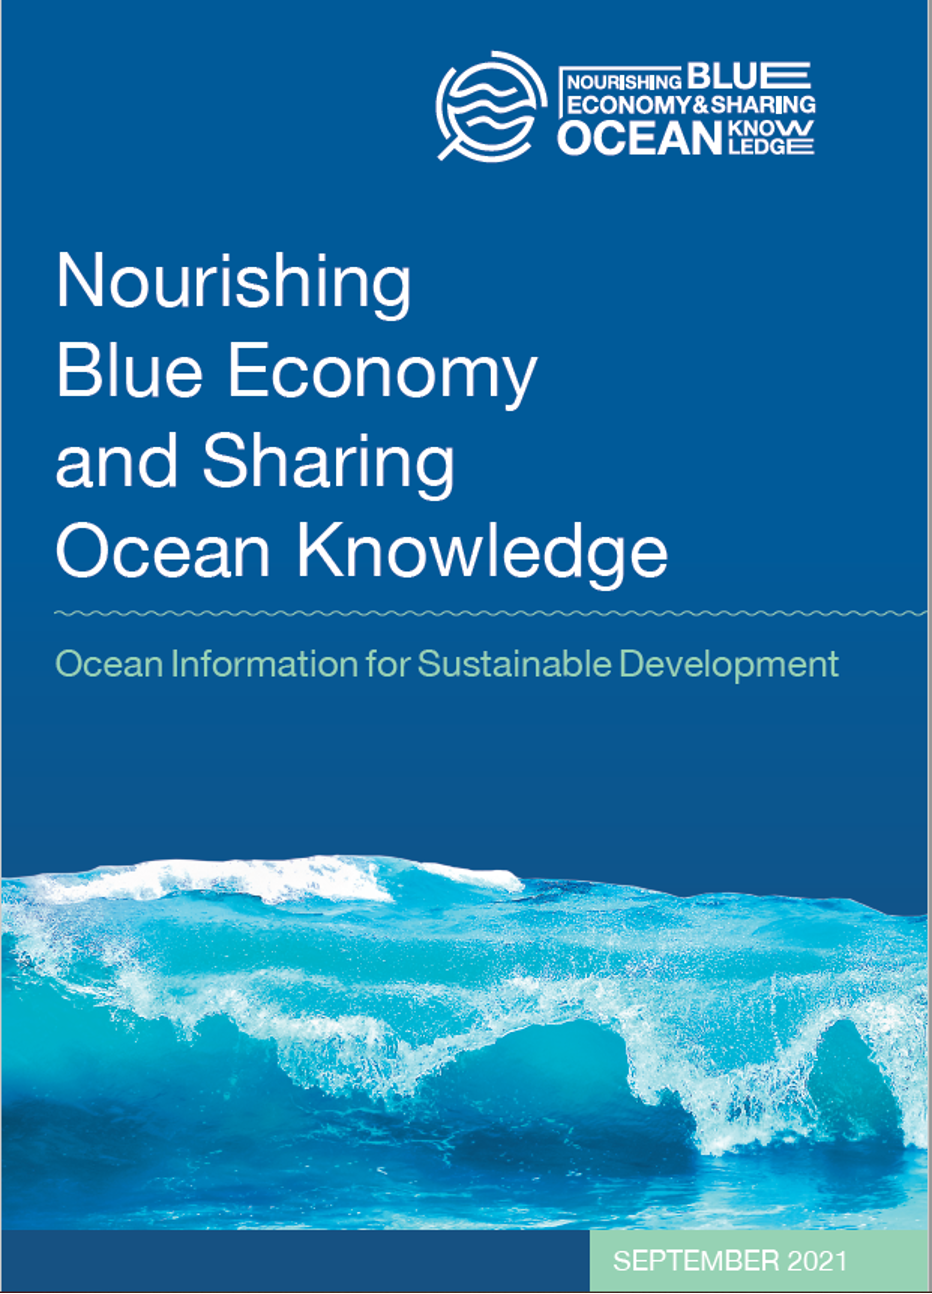 Nourishing the Blue Economy Policy Brief